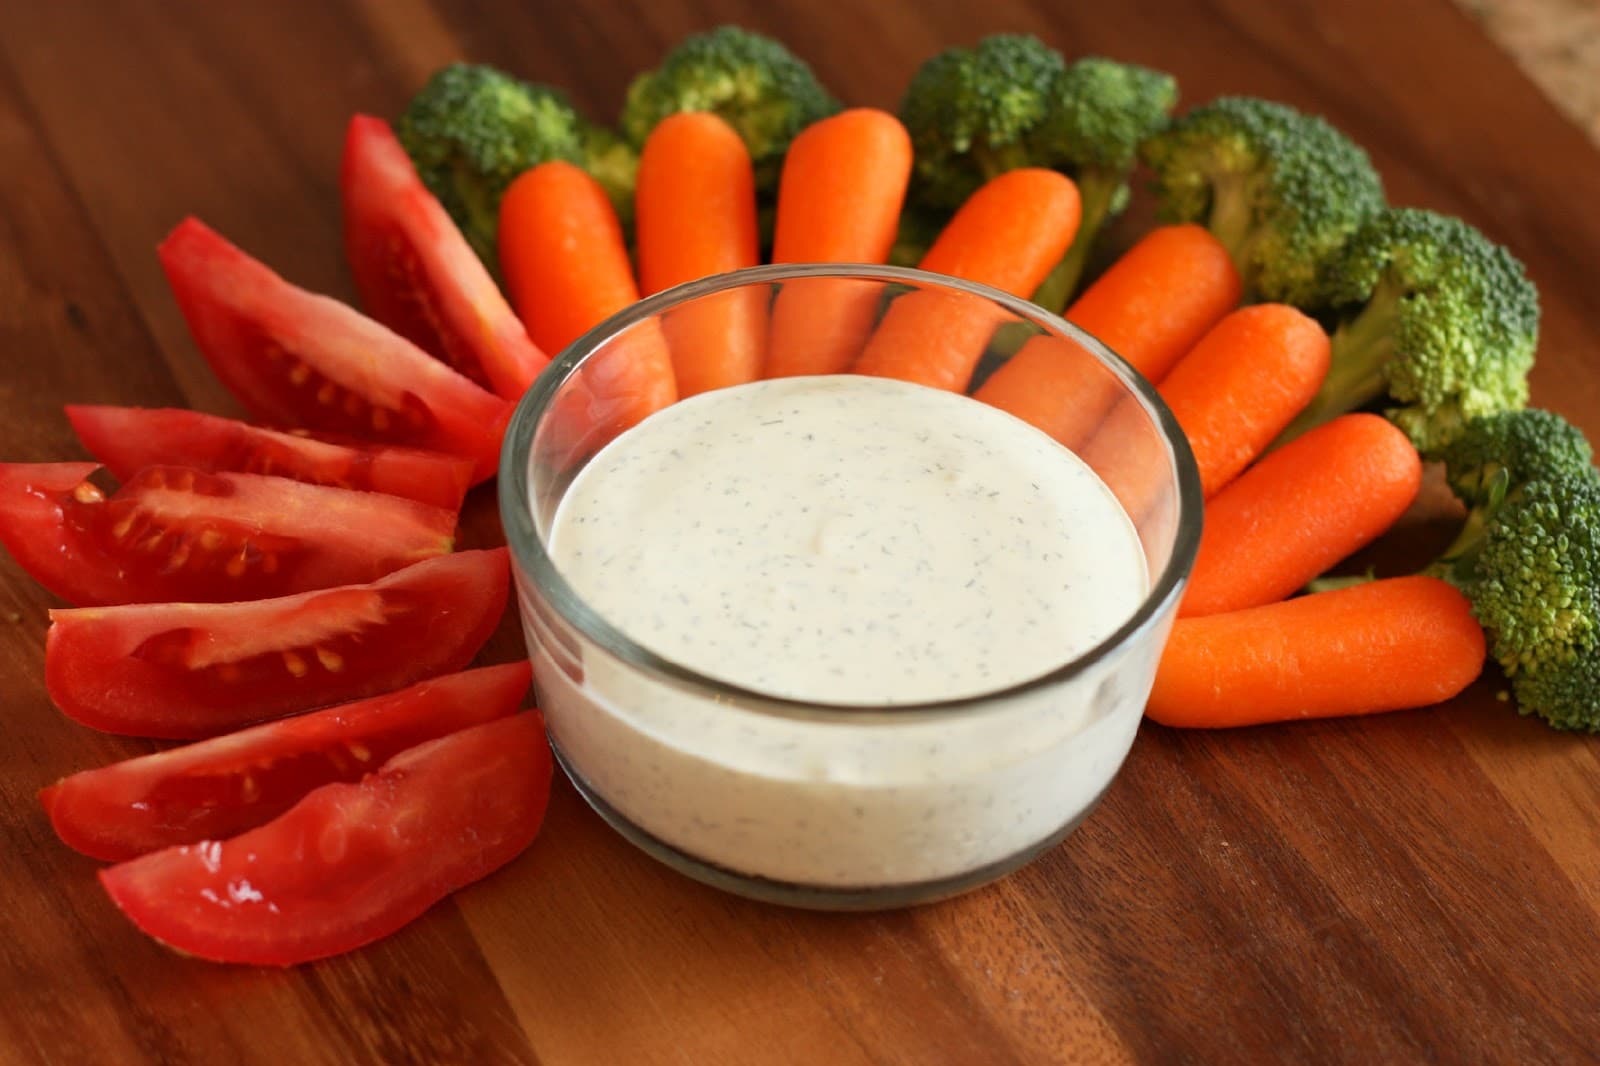 Simple Dill Dip for Veggies, Chips or Crackers - Cooking Classy